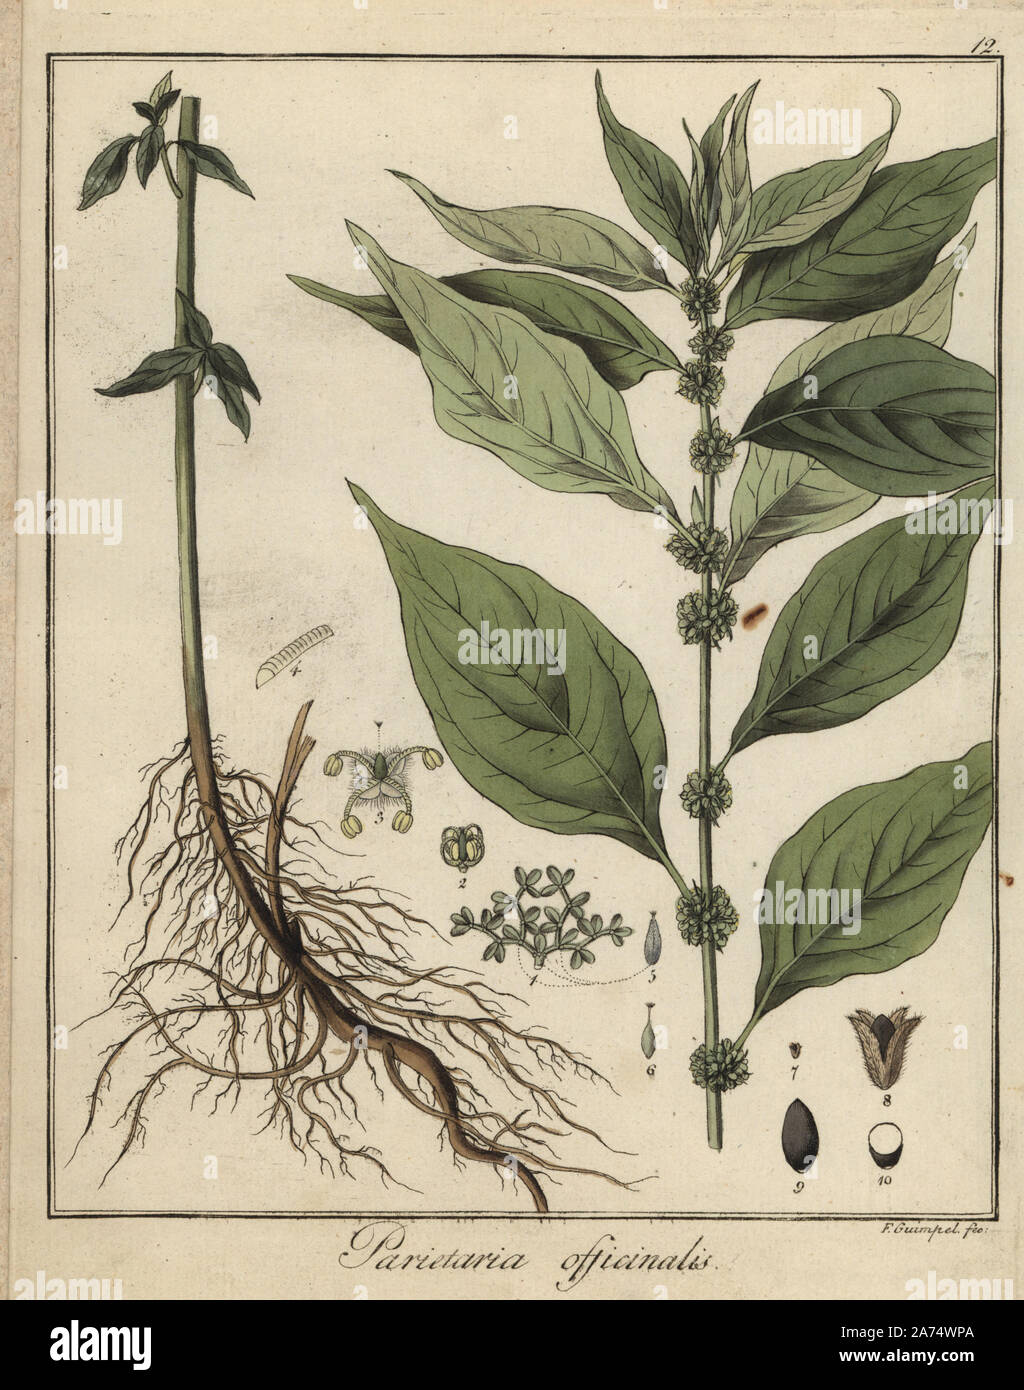 Pellitory-of-the-wall, Parietaria officinalis. Handcoloured copperplate engraving by F. Guimpel from Dr. Friedrich Gottlob Hayne's Medical Botany, Berlin, 1822. Hayne (1763-1832) was a German botanist, apothecary and professor of pharmaceutical botany at Berlin University. Stock Photo